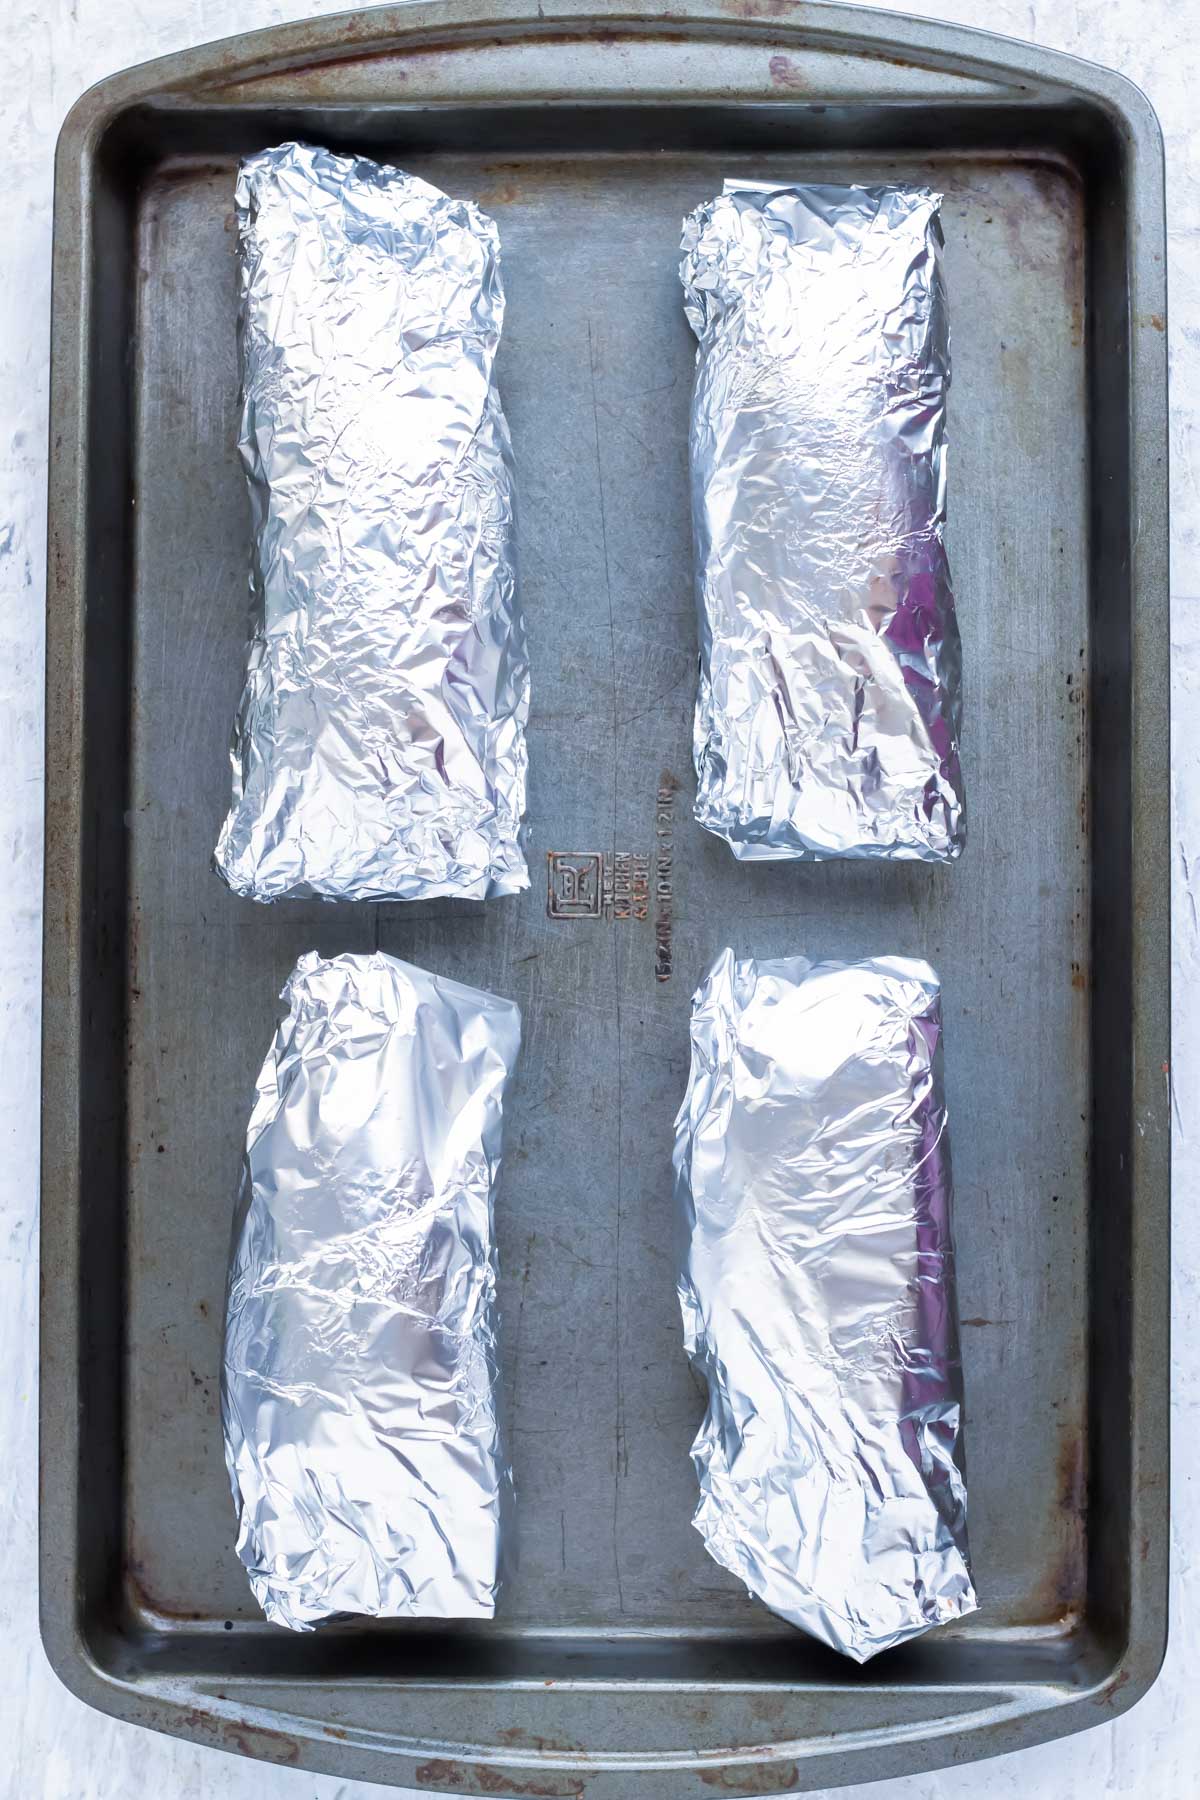 Four sweet potatoes are wrapped in foil and baked in the oven.